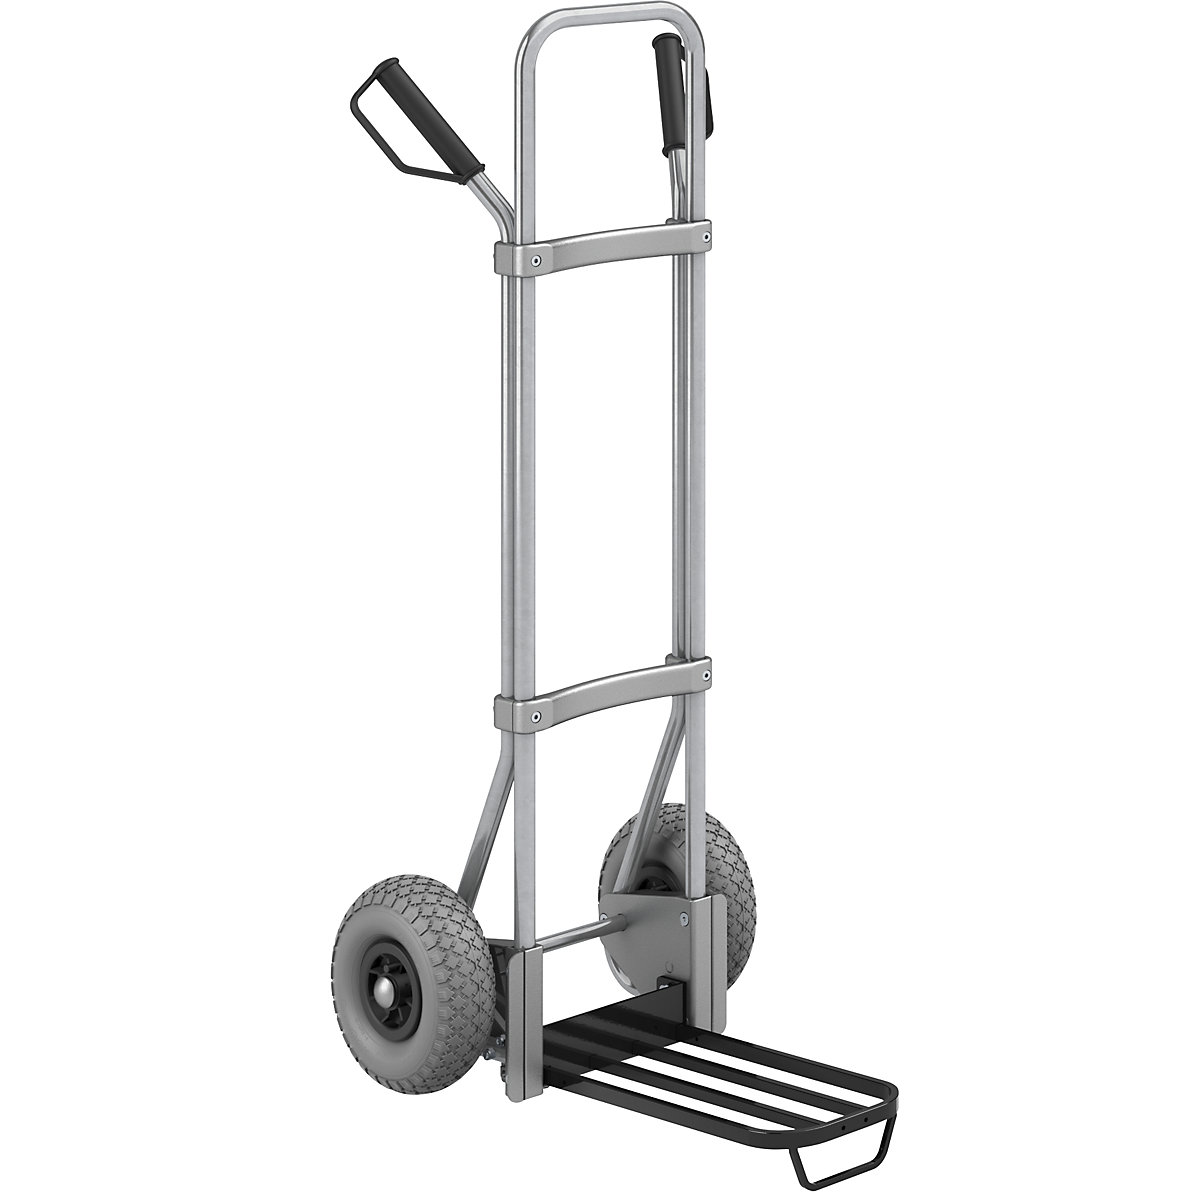 Sack truck, zinc plated – eurokraft pro, parcel footplate WxD 430 x 250 mm, black, with handle, PU tyres-3